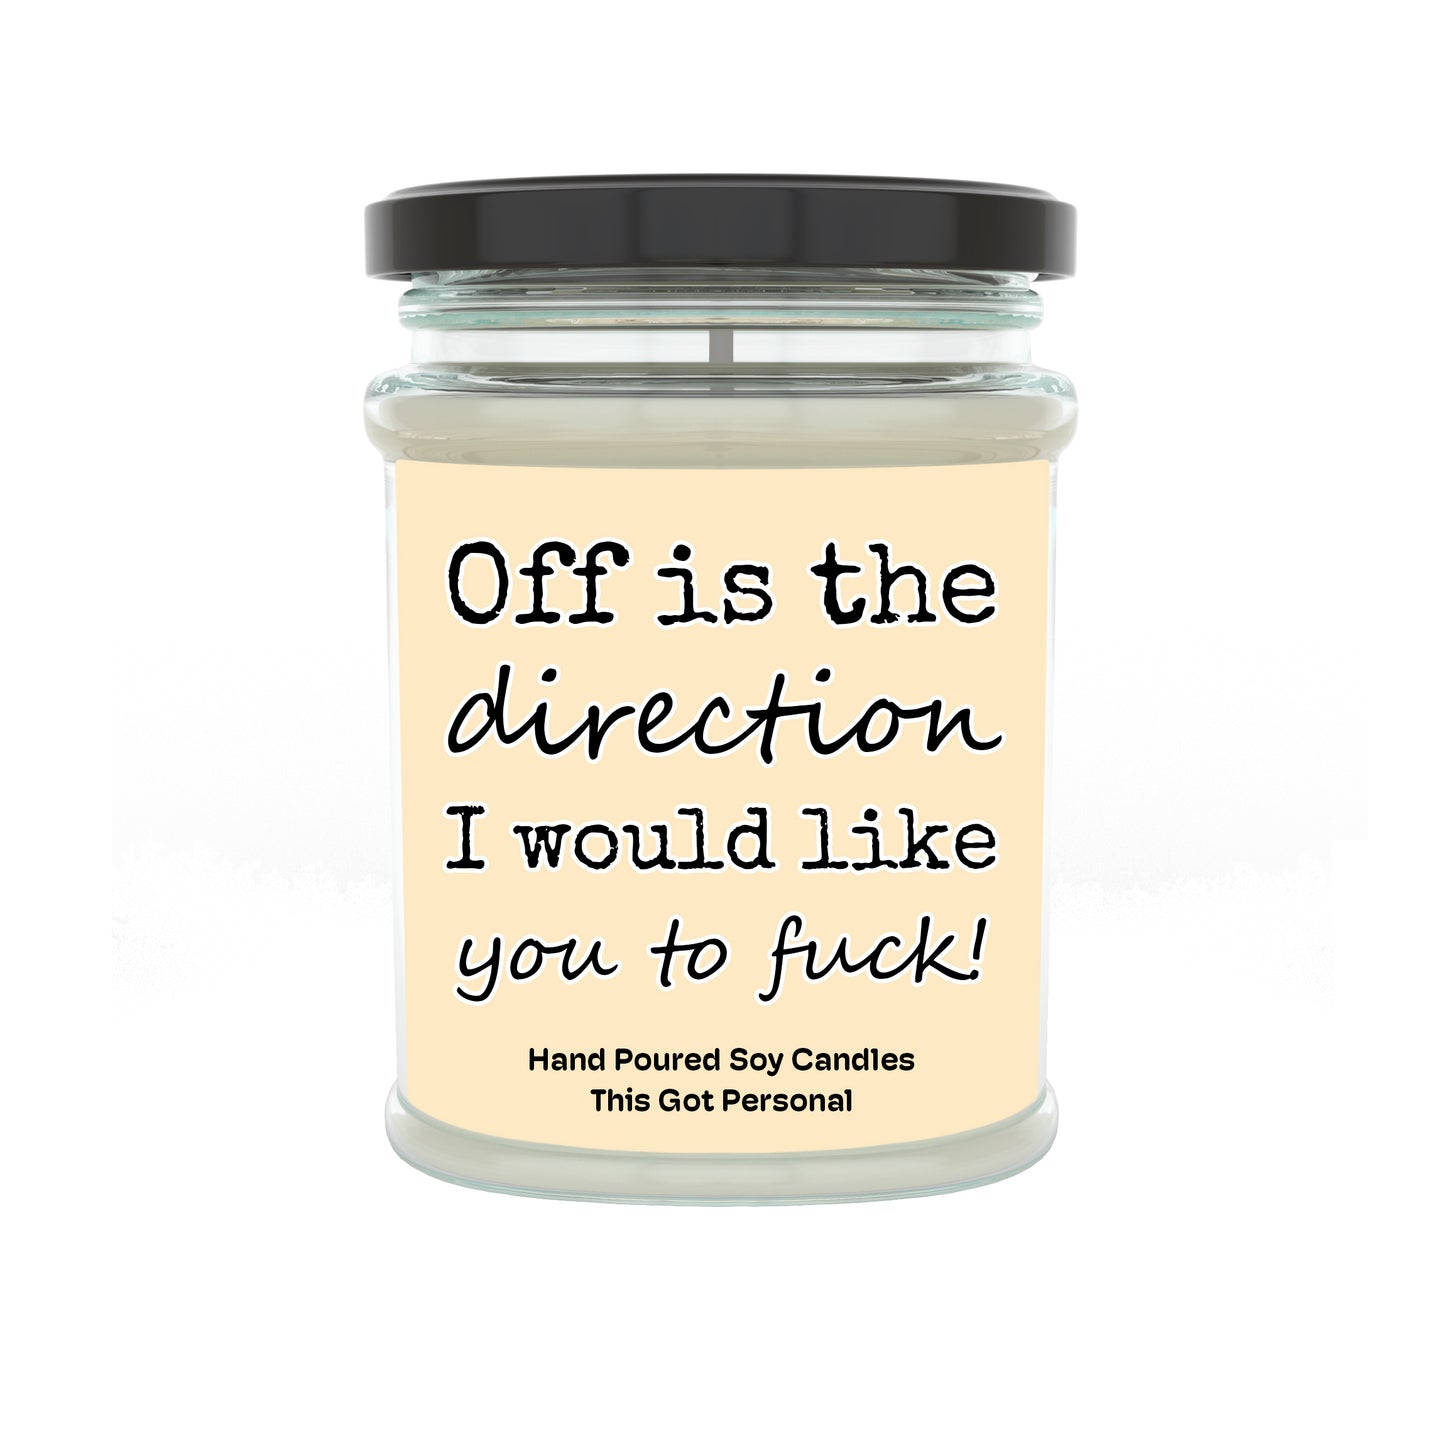 Off is the direction